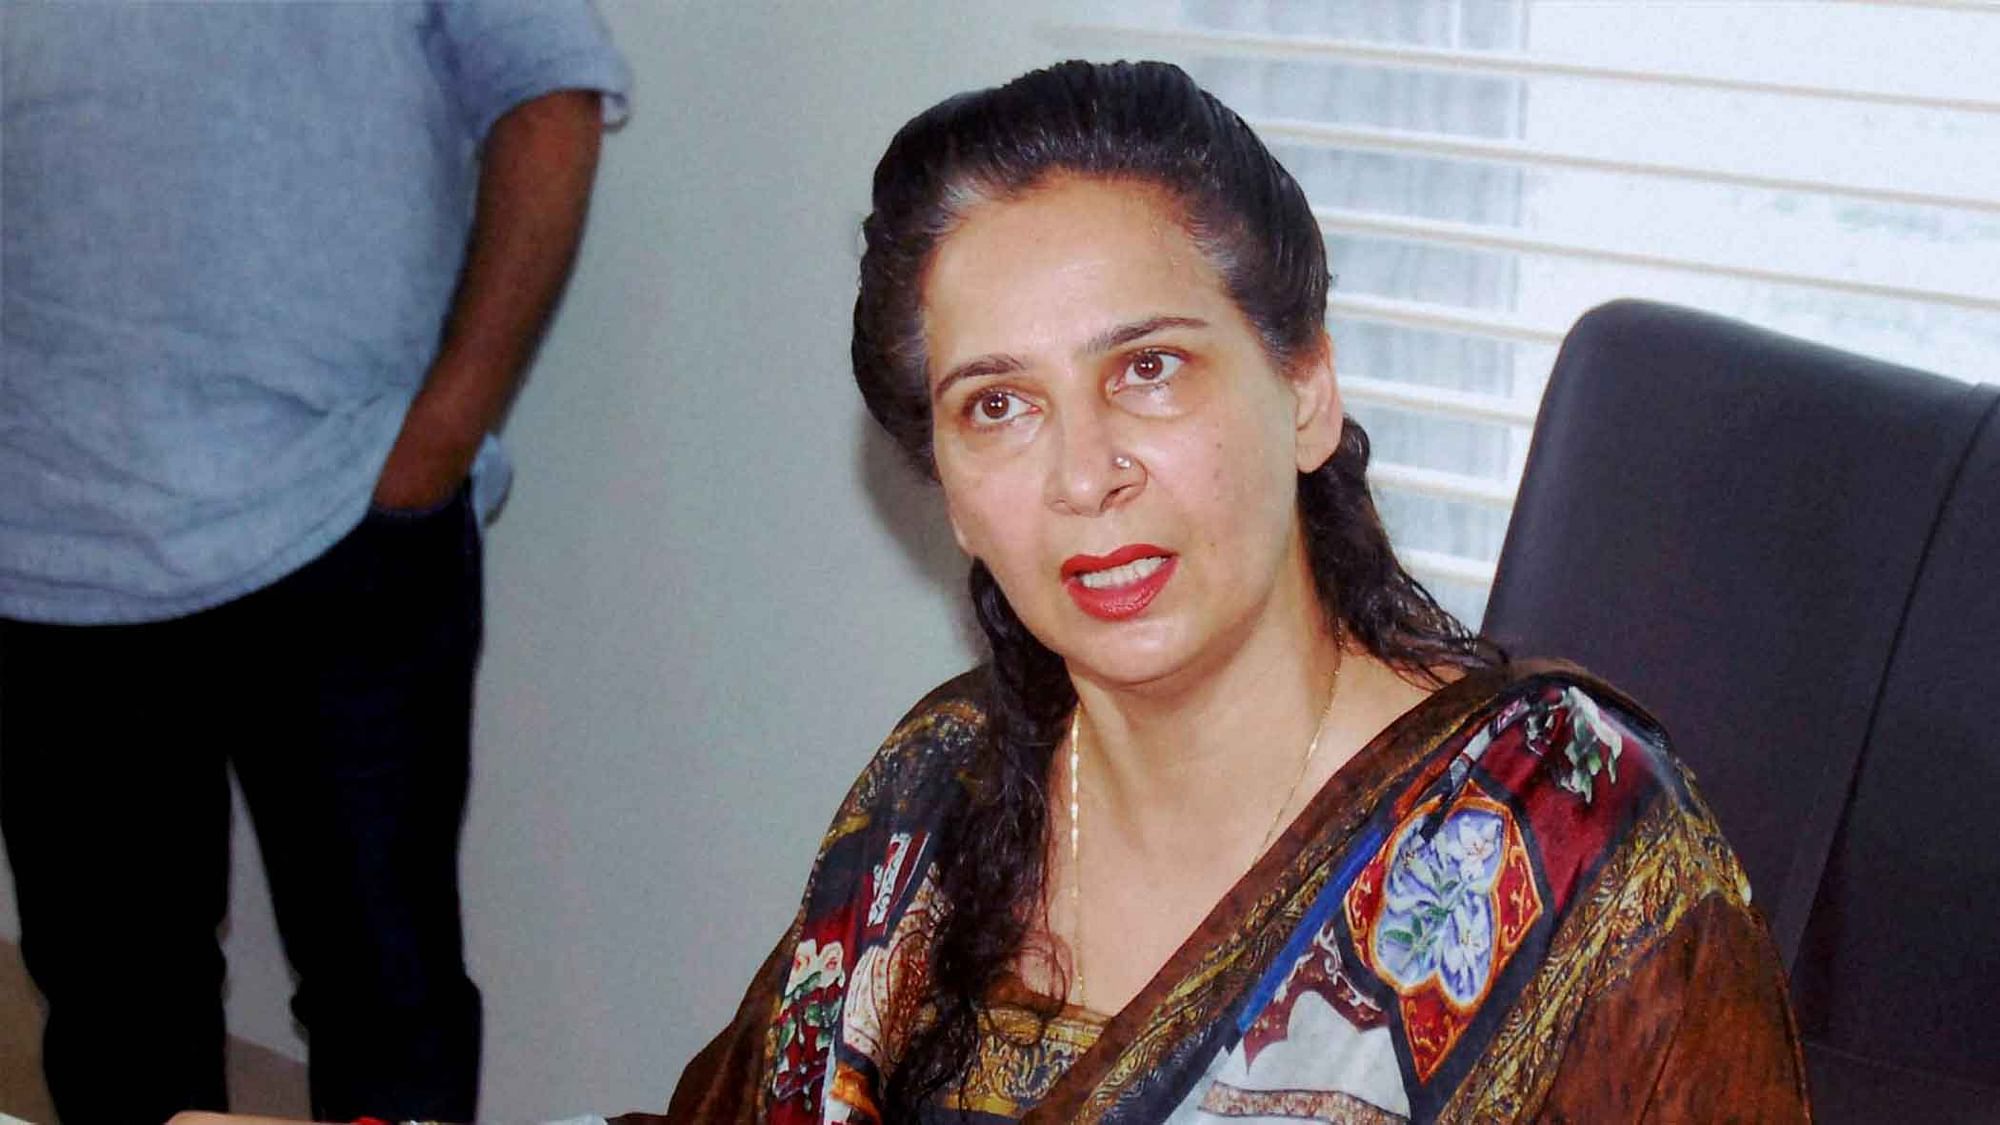 Navjot Kaur Sidhu, following in the footsteps of her husband, has resigned from from the primary membership of the party. (Photo Courtesy: PTI)